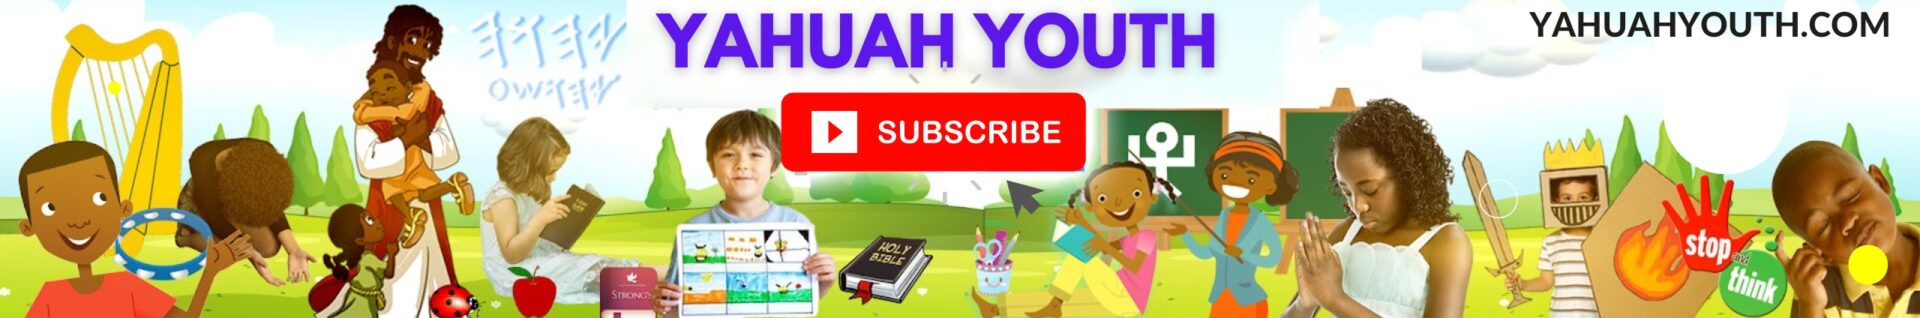 Yahuah-Youth-Banner-REsized